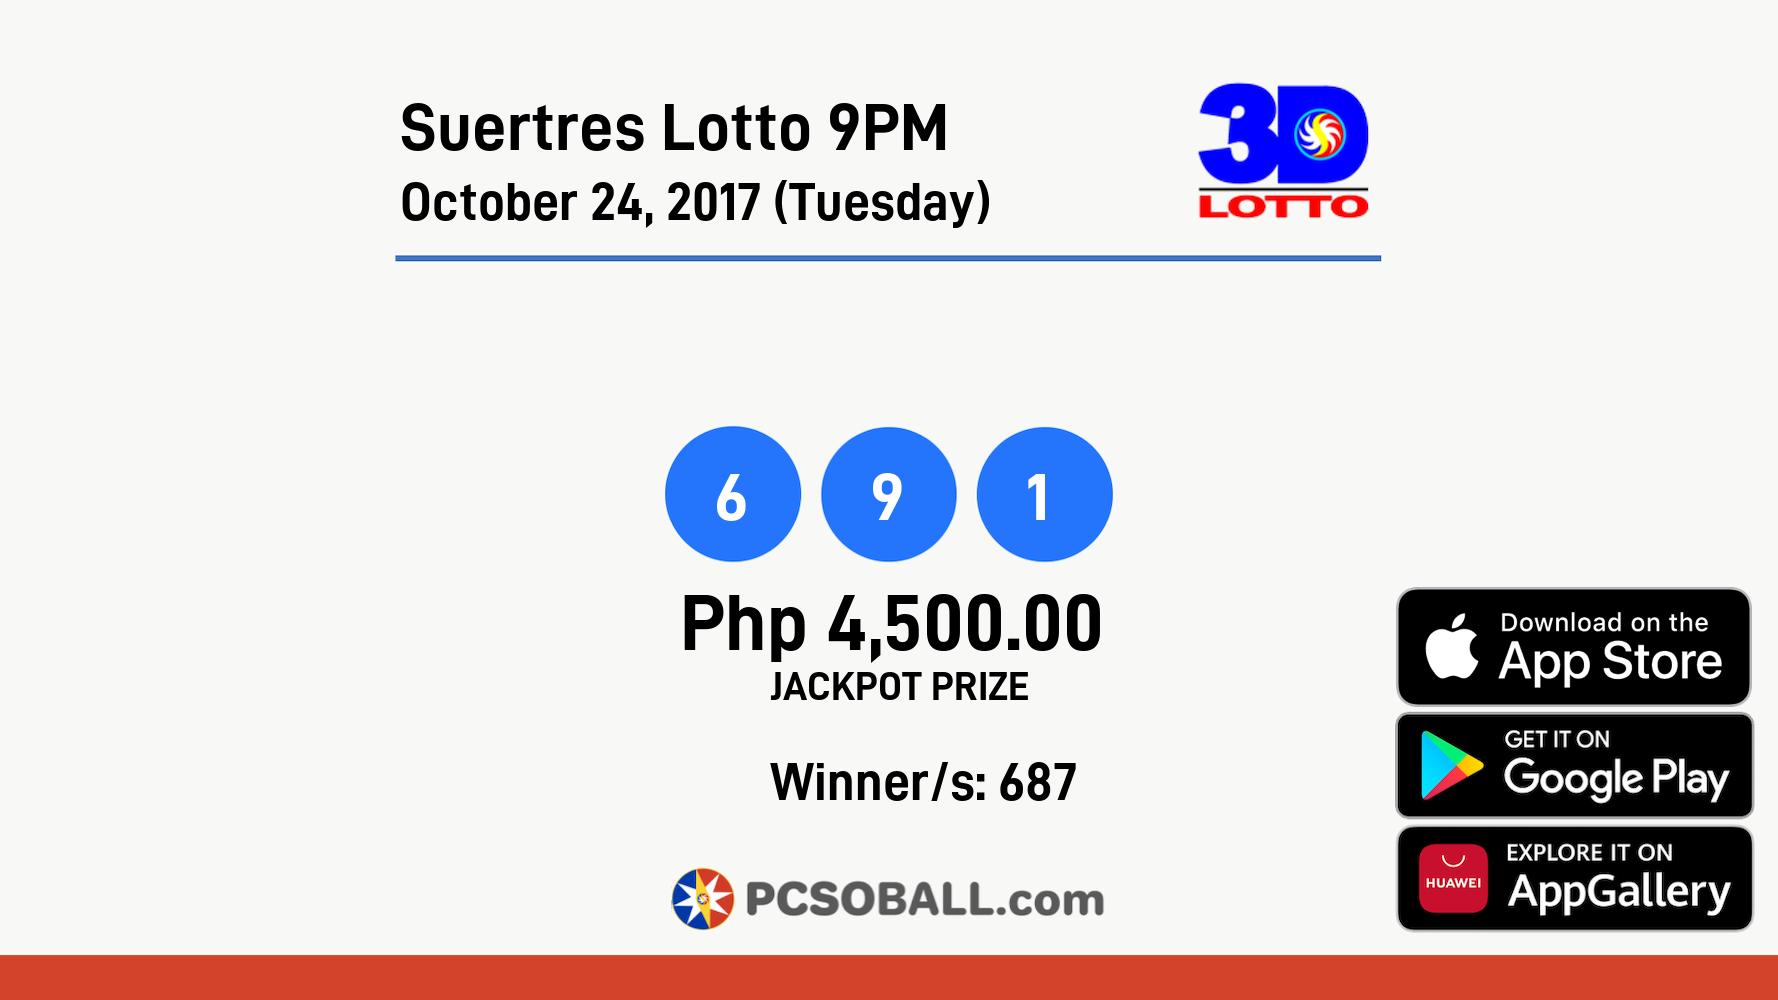 Suertres Lotto 9PM October 24, 2017 (Tuesday) Result